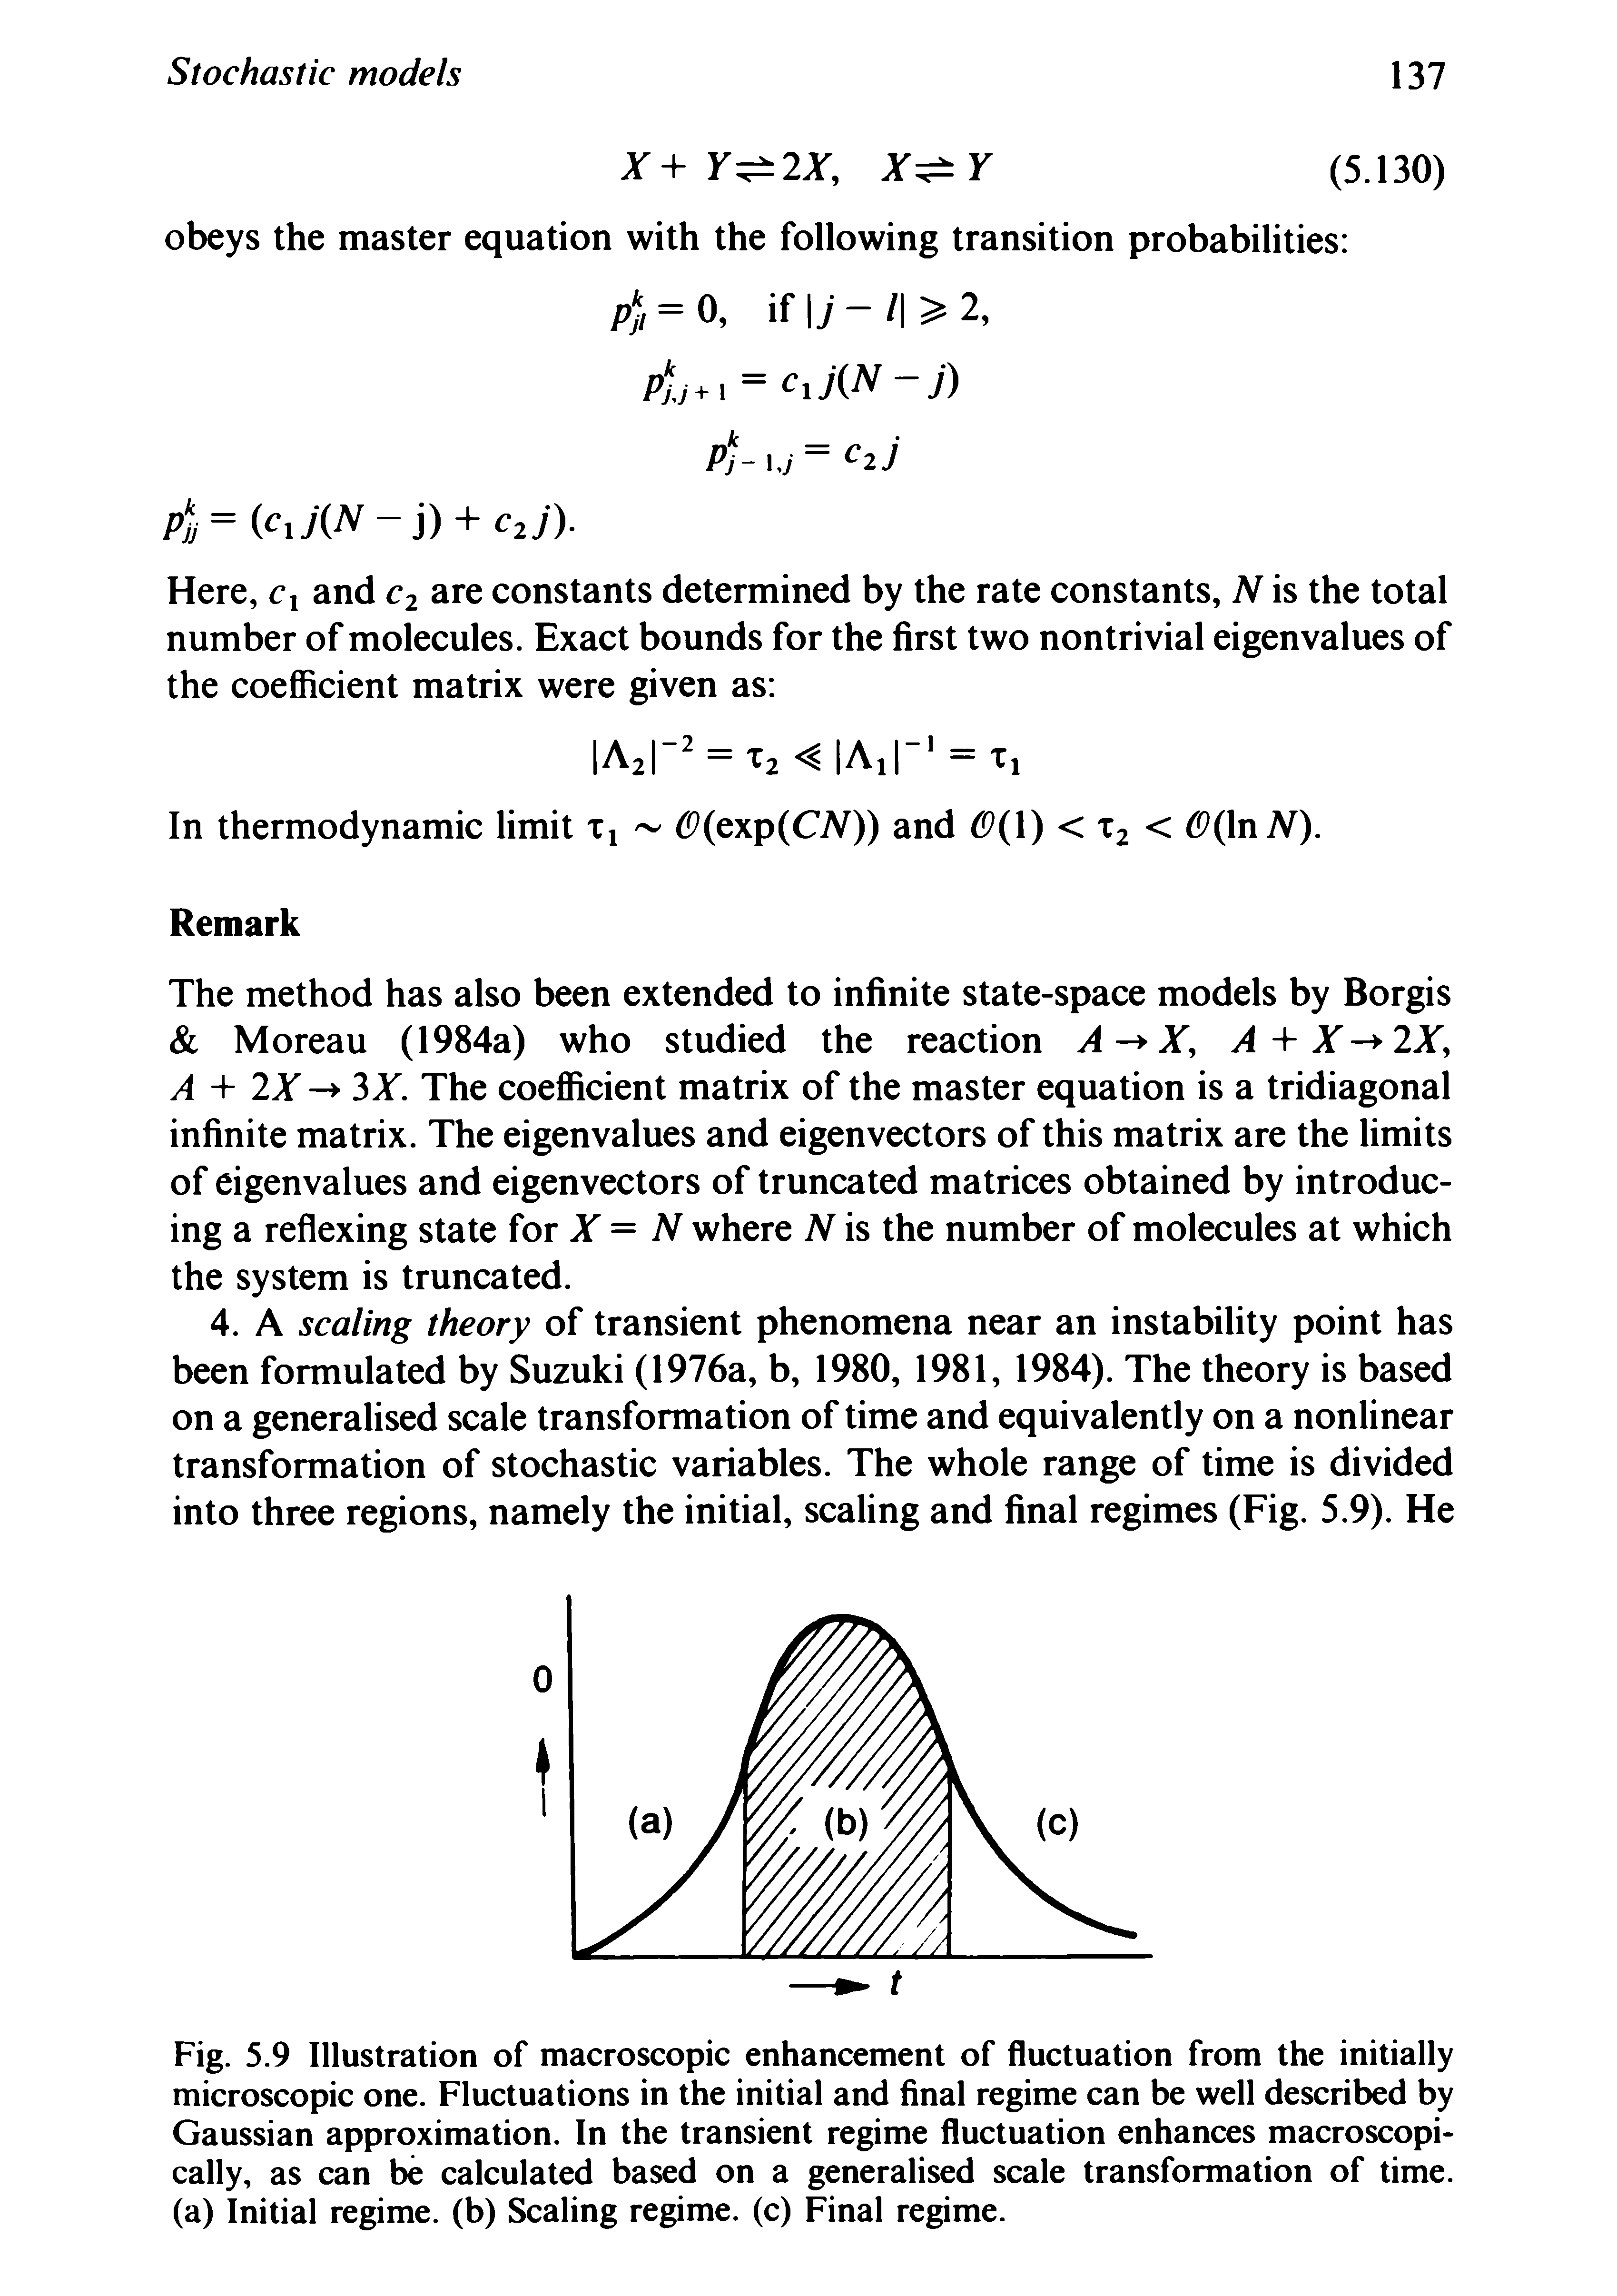 Fig. 5.9 Illustration of macroscopic enhancement of fluctuation from the initially microscopic one. Fluctuations in the initial and final regime can be well described by Gaussian approximation. In the transient regime fluctuation enhances macroscopi-cally, as can be calculated based on a generalised scale transformation of time, (a) Initial regime, (b) Scaling regime, (c) Final regime.